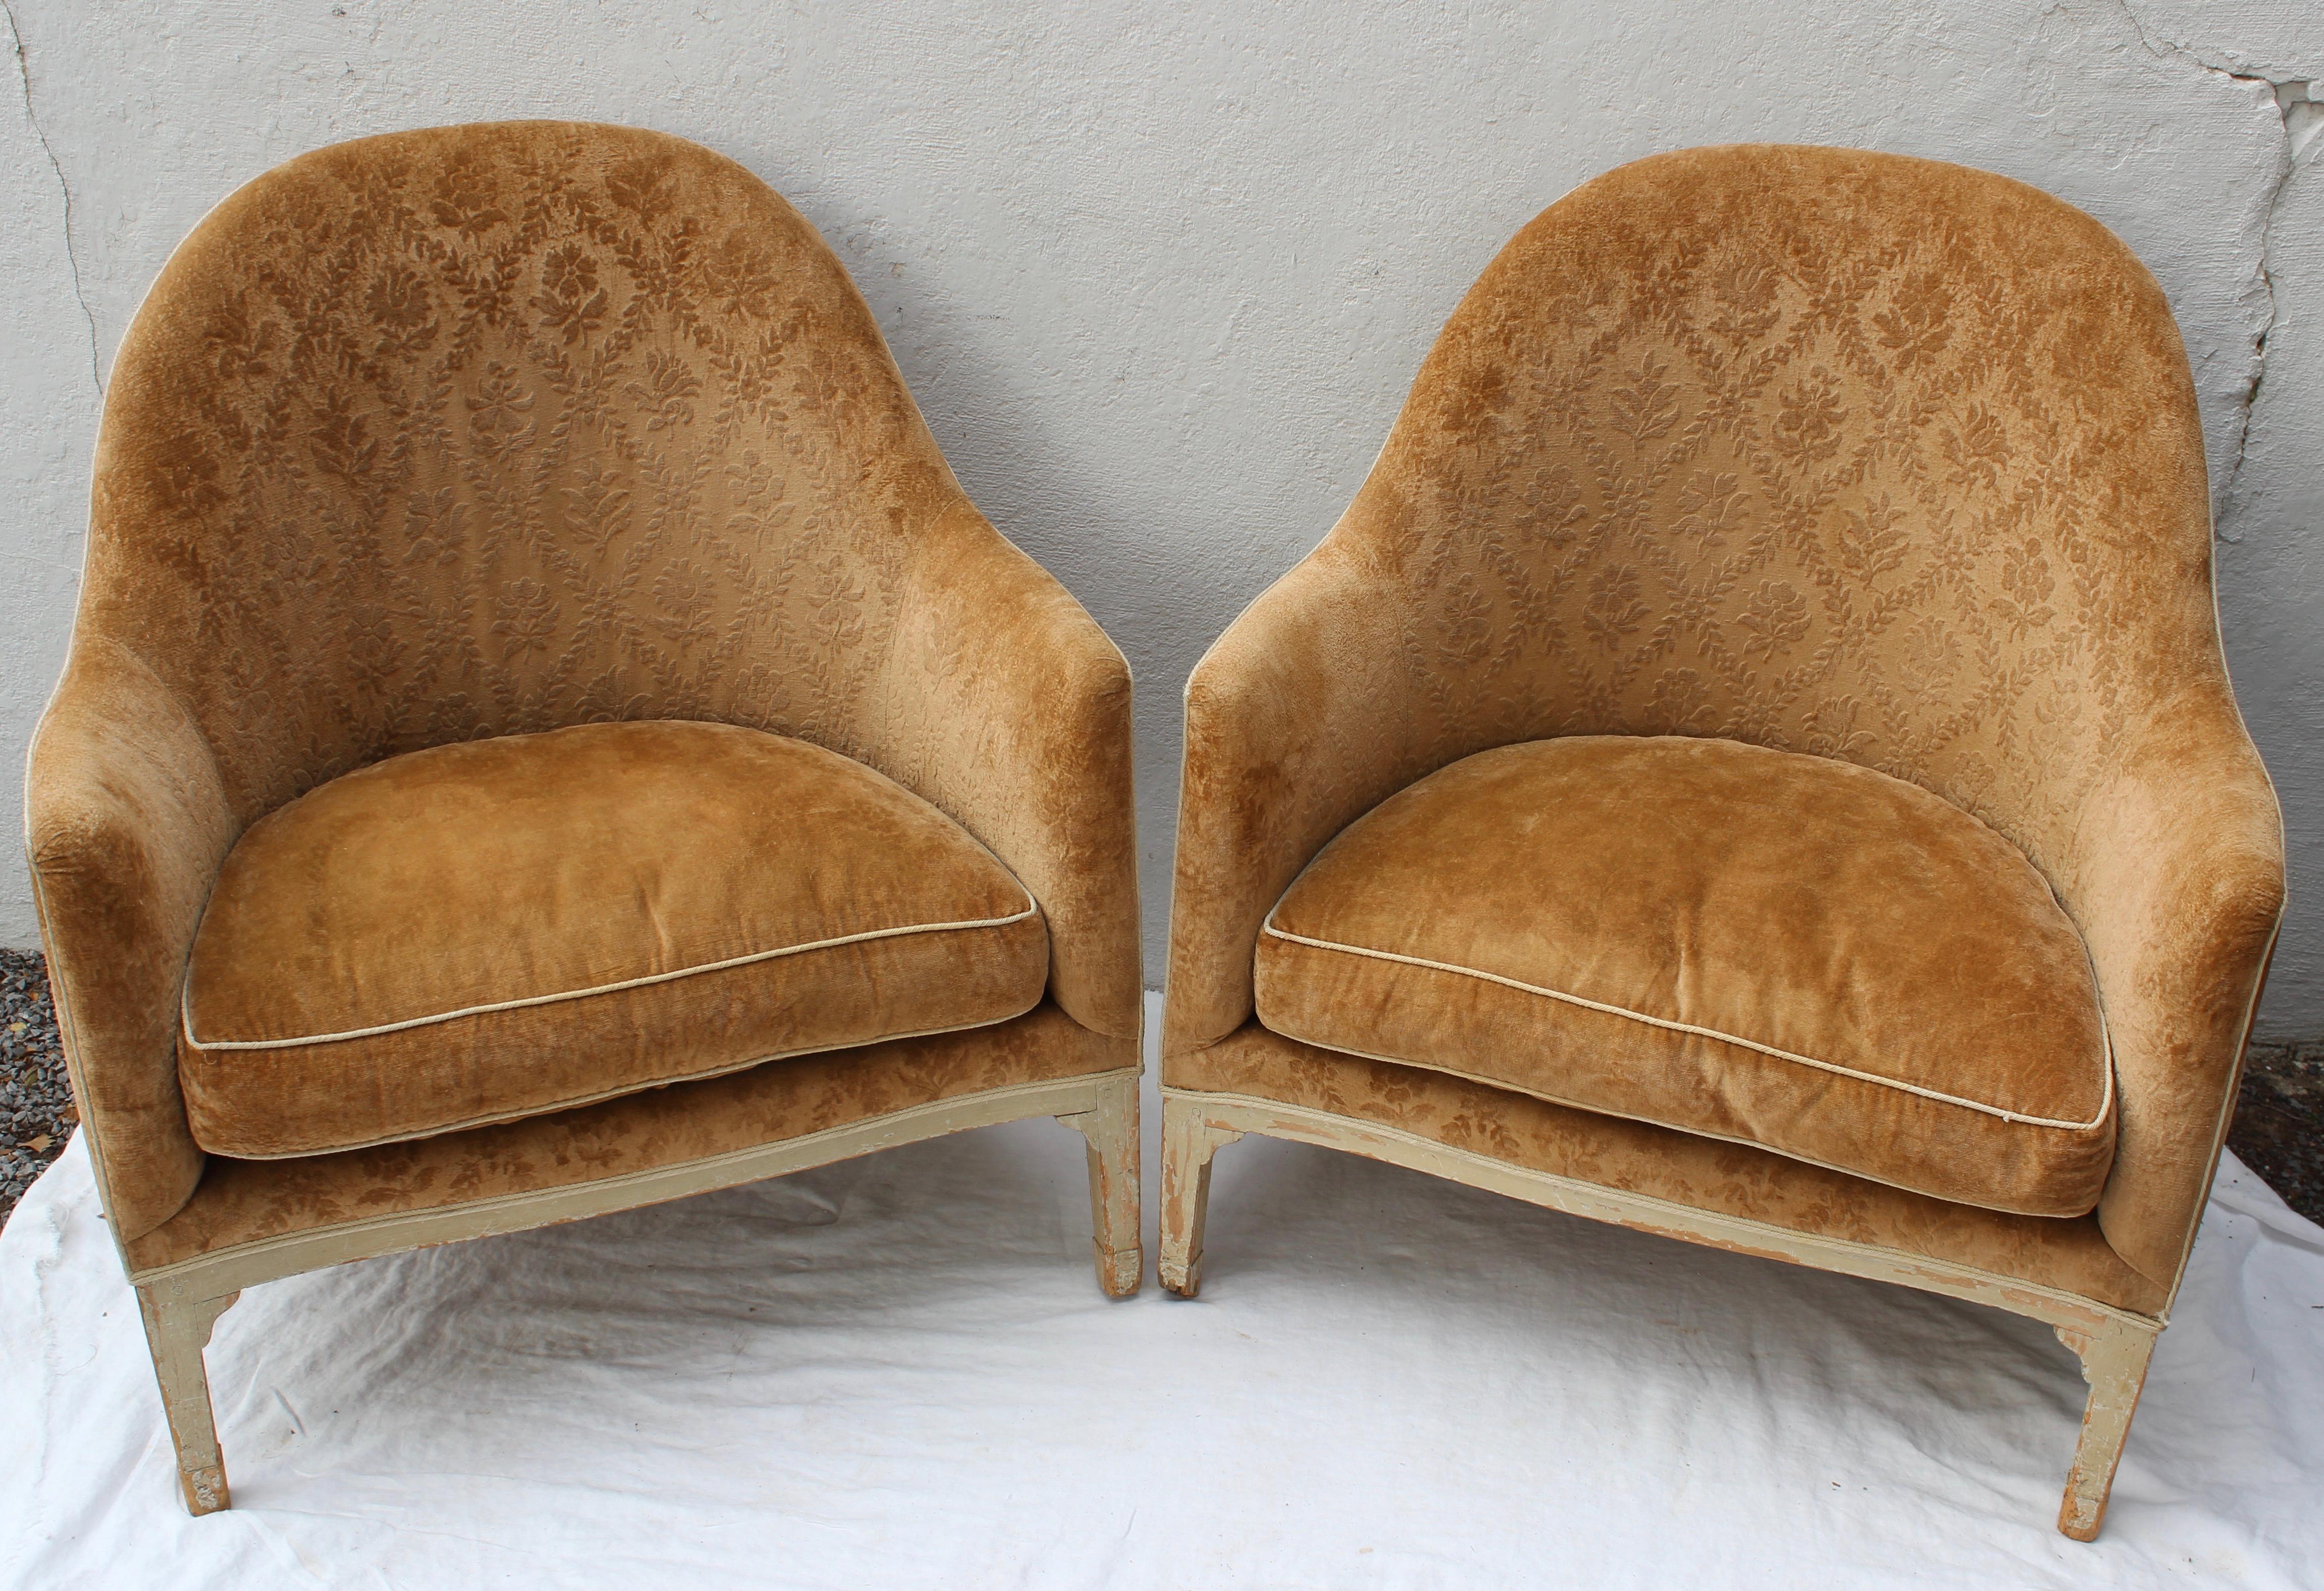 Pair of large 19th century French Louis XVI style five-legged bergere chairs.
Arched back and loose cushions. Velvet upholstery in great condition.

Measures: Seat height 18